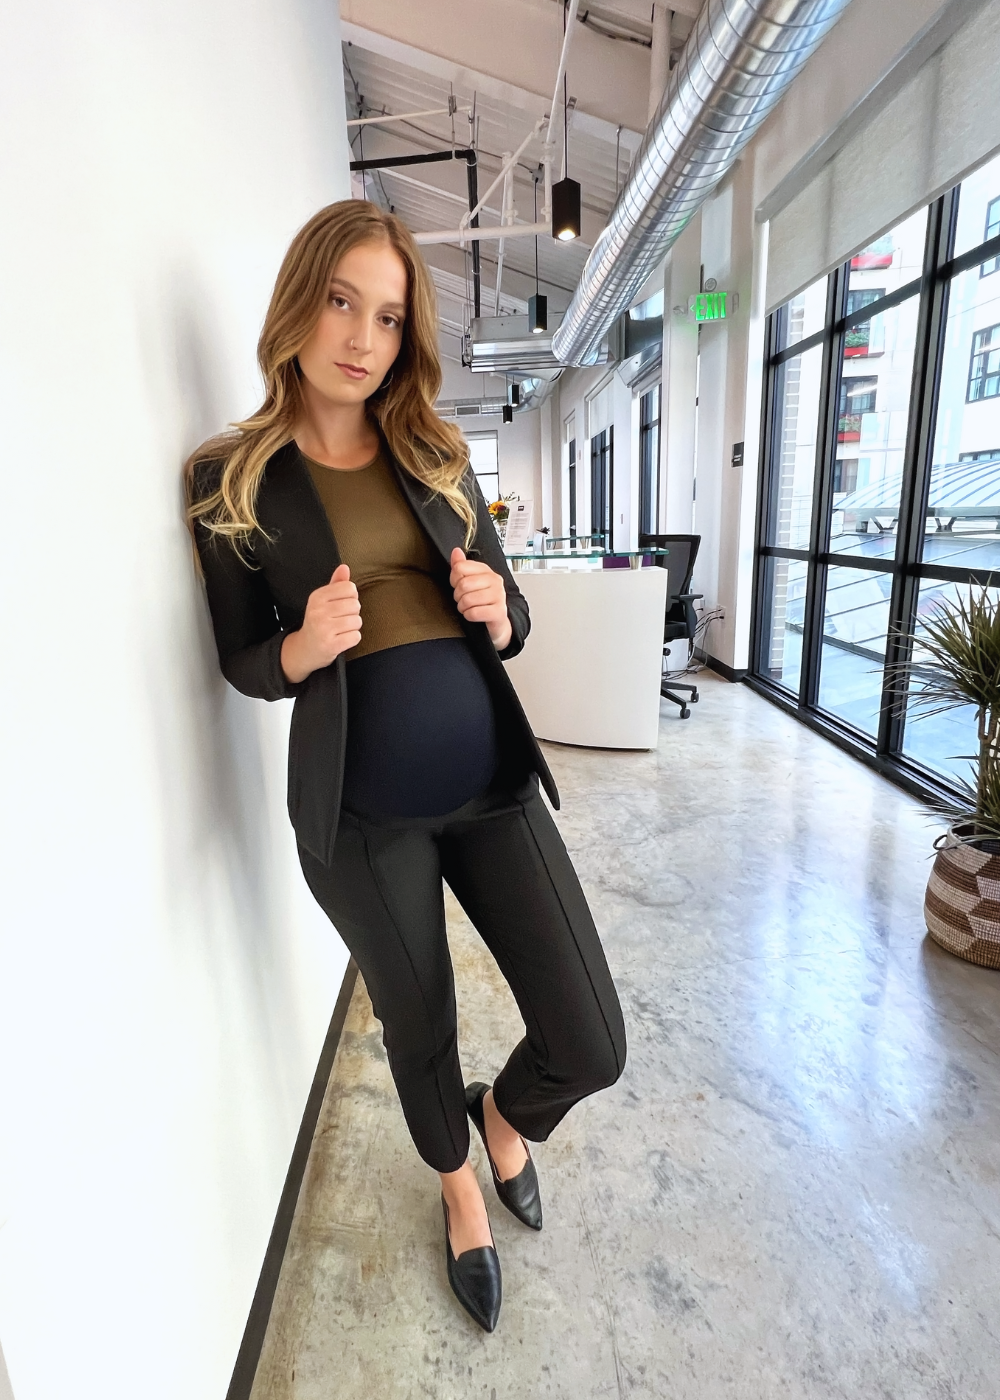 Black maternity workwear pants with stretch belly for bump comfort. Made with luxury stretch Italian suiting fabric. Featuring real pockets and slimming princess seams. Washable, sustainable, petite friendly pants. 